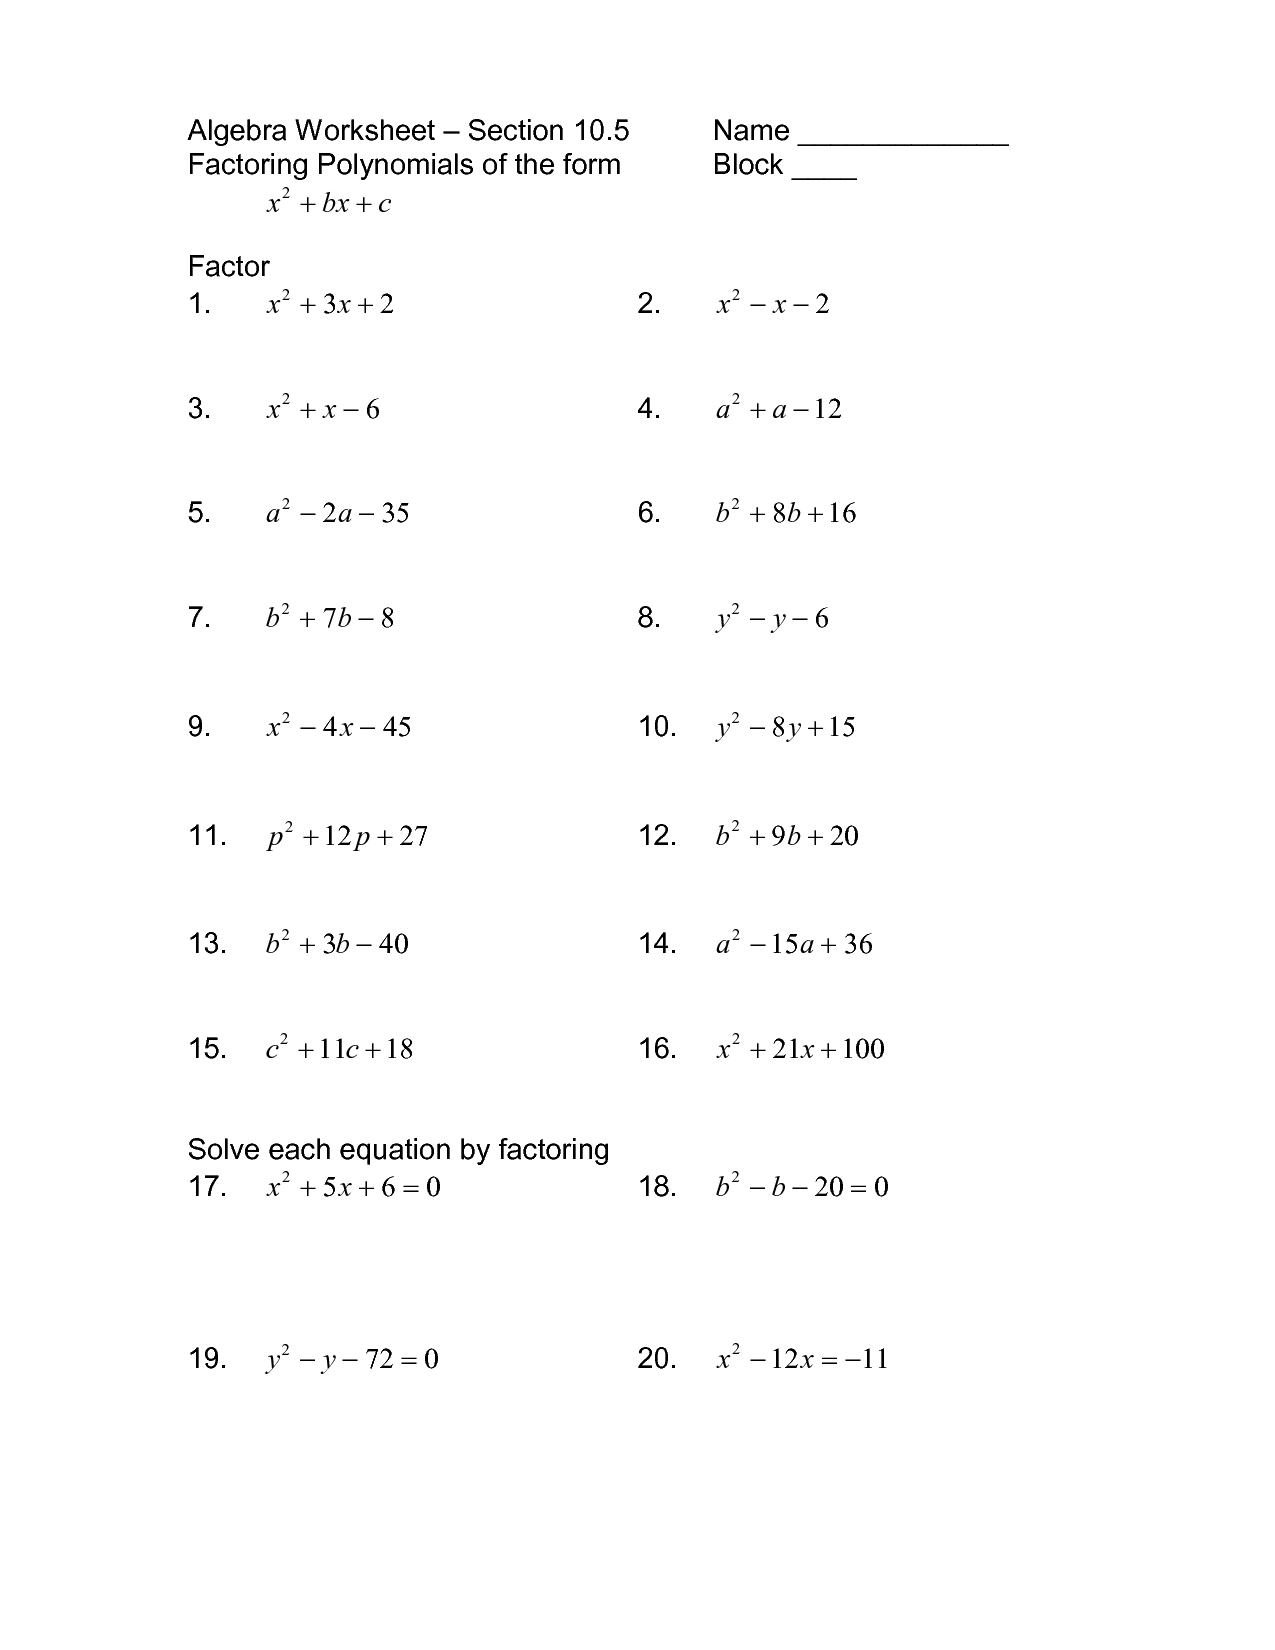 Factoring Polynomials Worksheet With Answers Algebra 2 Pdf